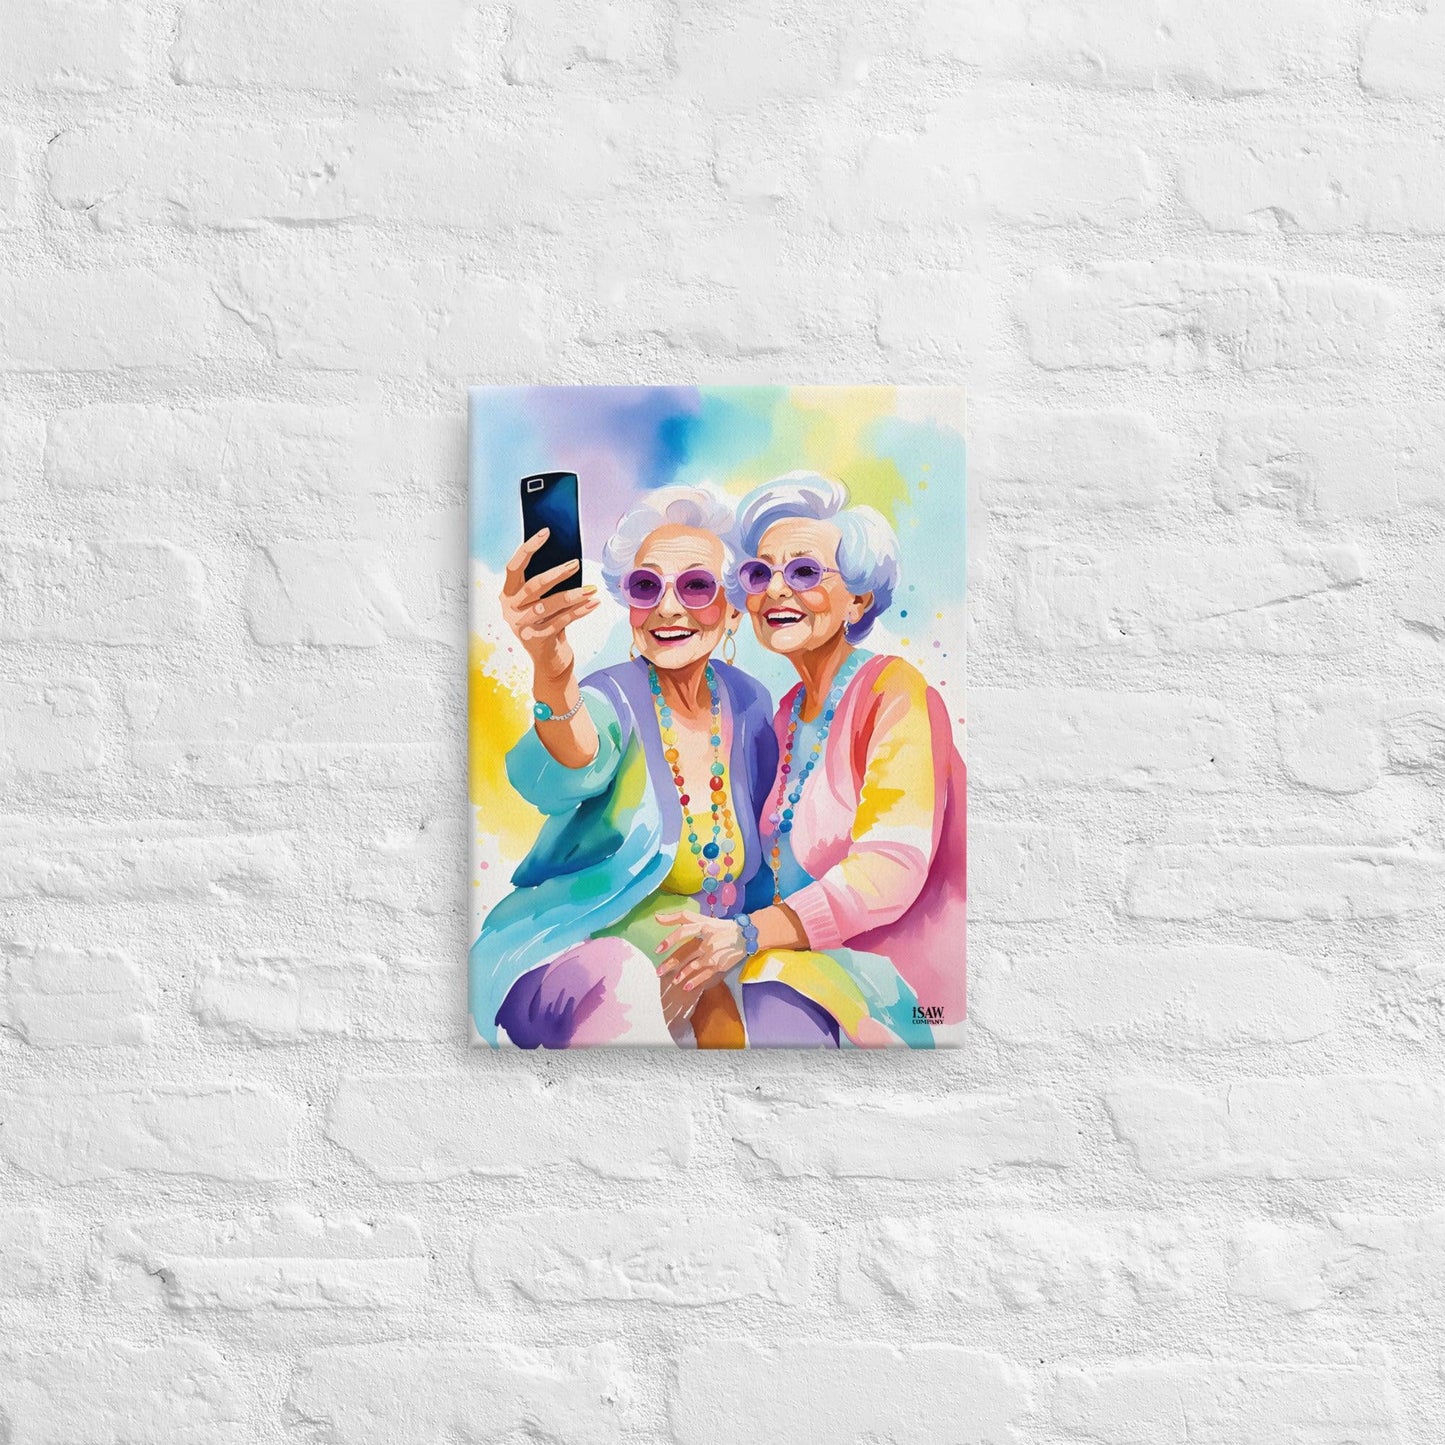 Selfies And The Senior Citizens V2 - Canvas Print - iSAW Company